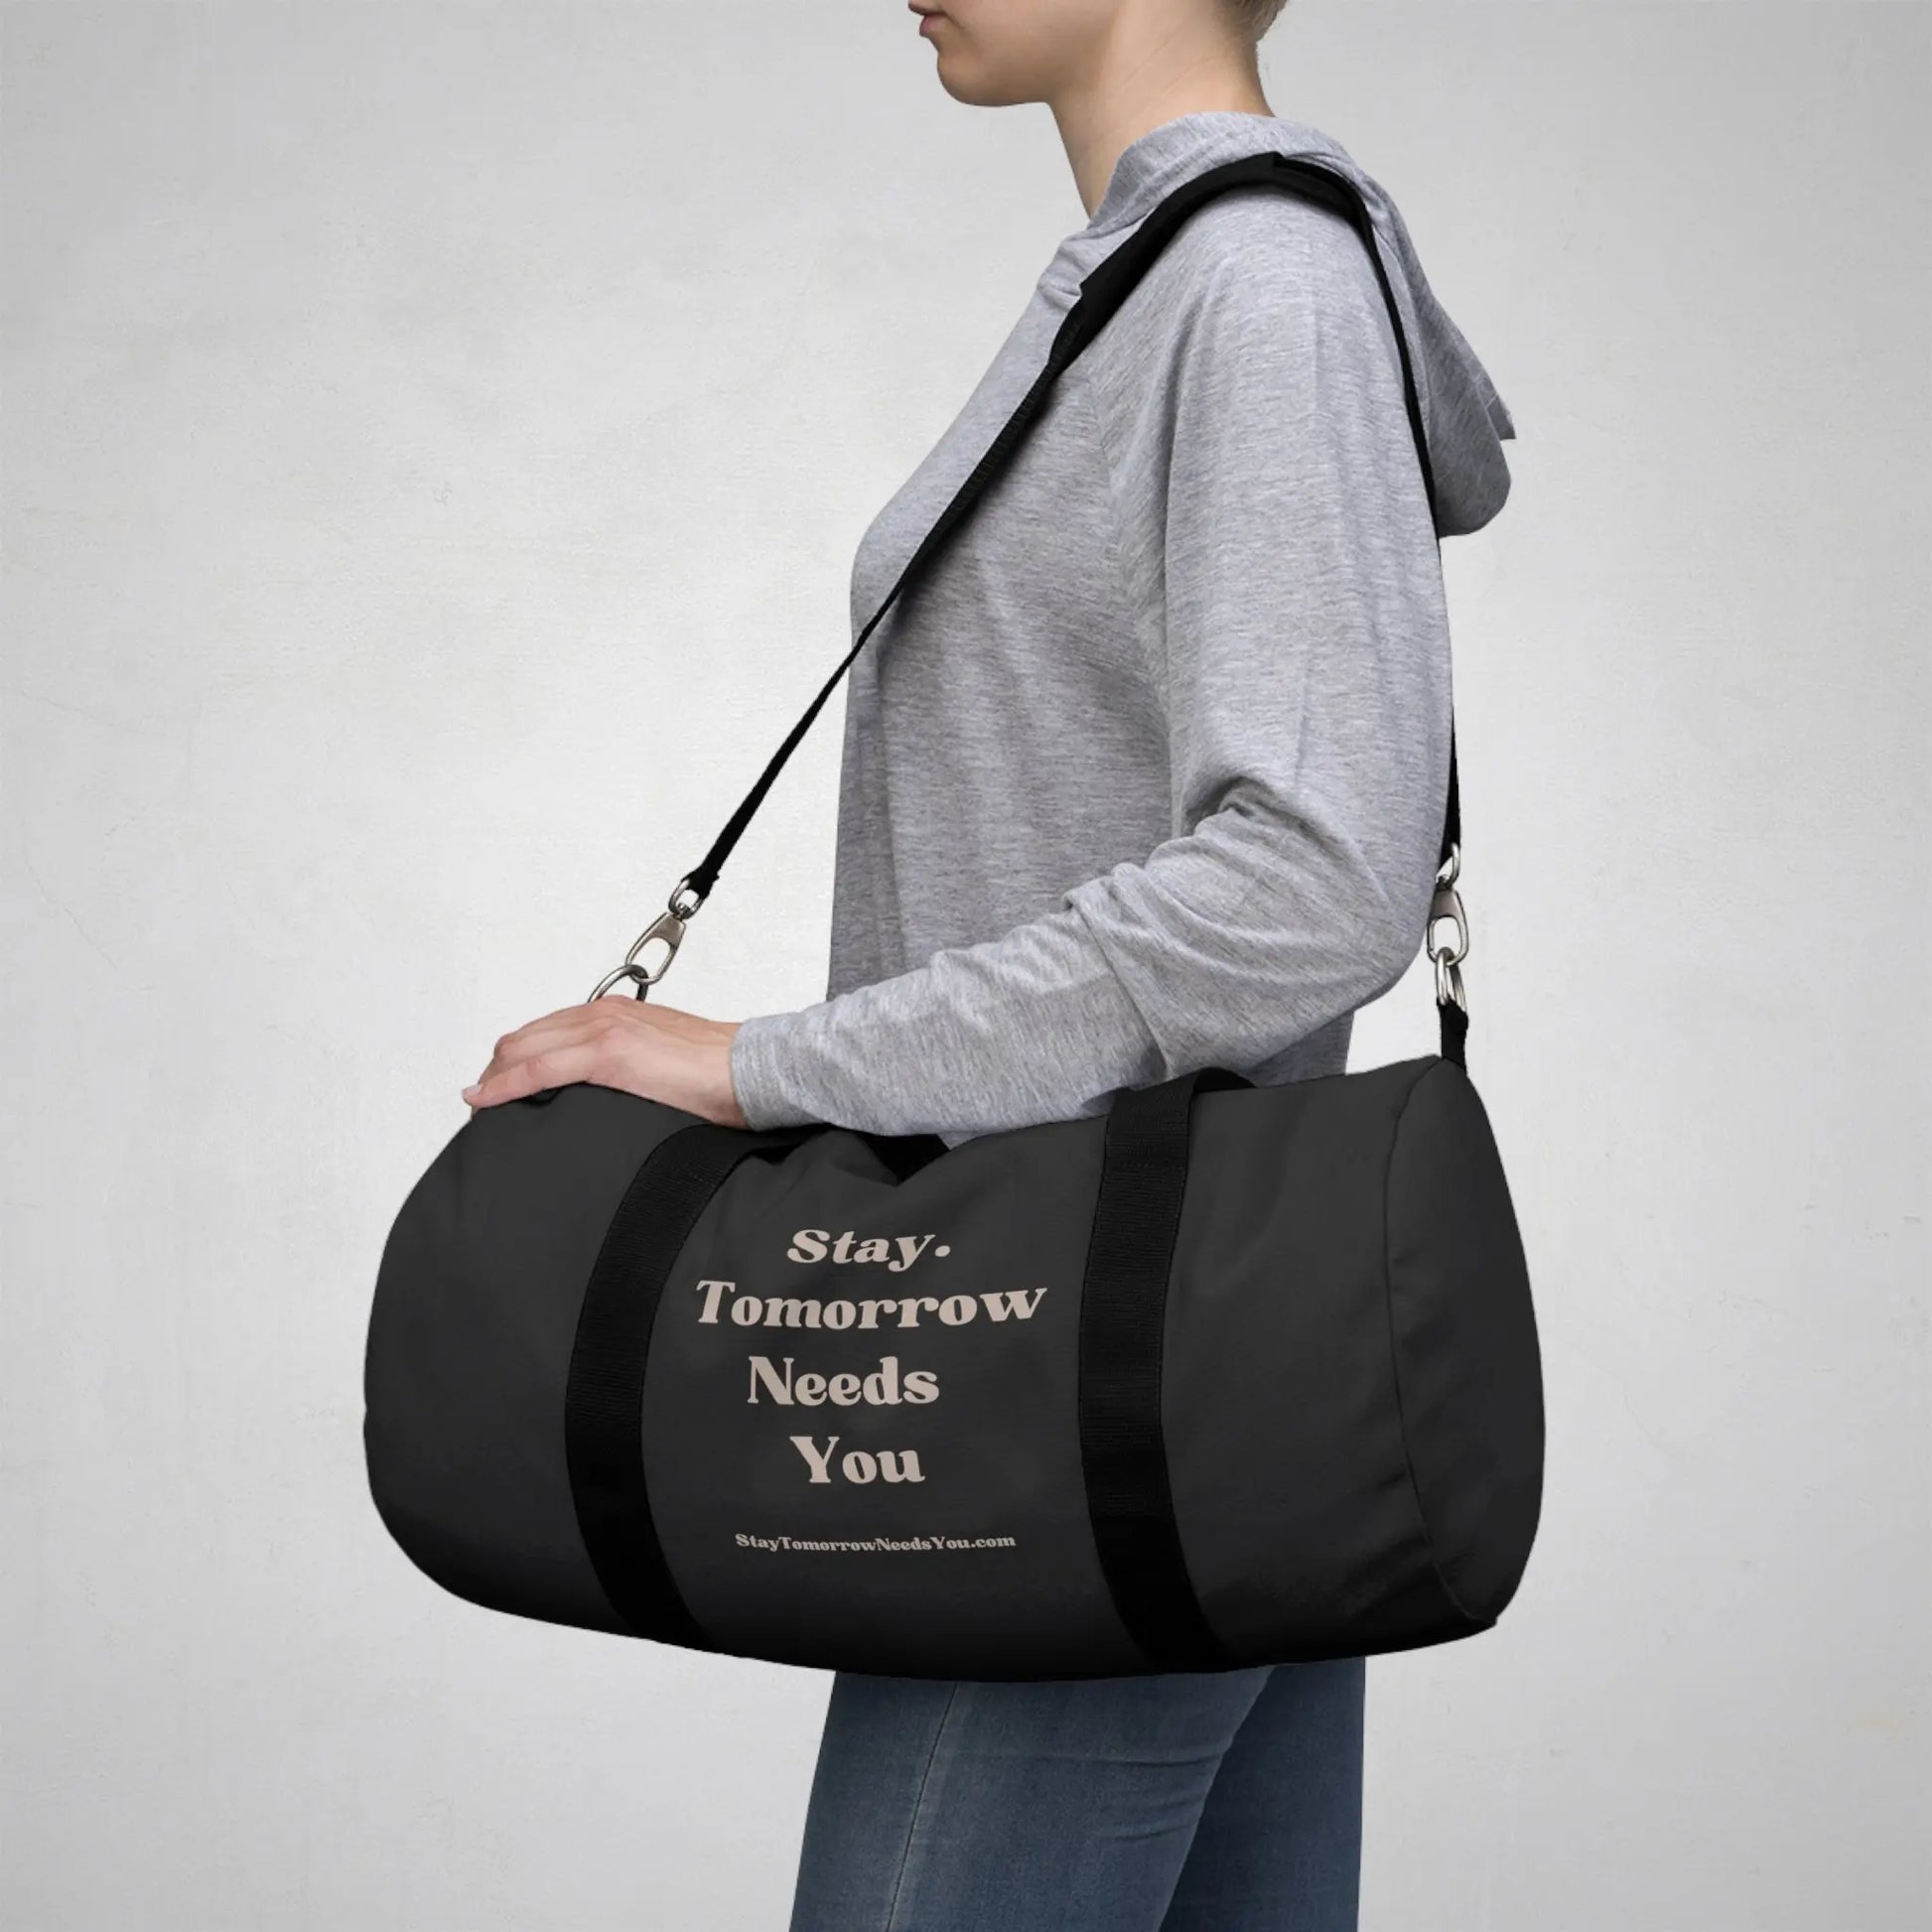 Stay Tomorrow Needs You Suicide Awareness Gym Duffel Bag - Carry your gear with style and spread mental health awareness. Stay motivated! Shop now